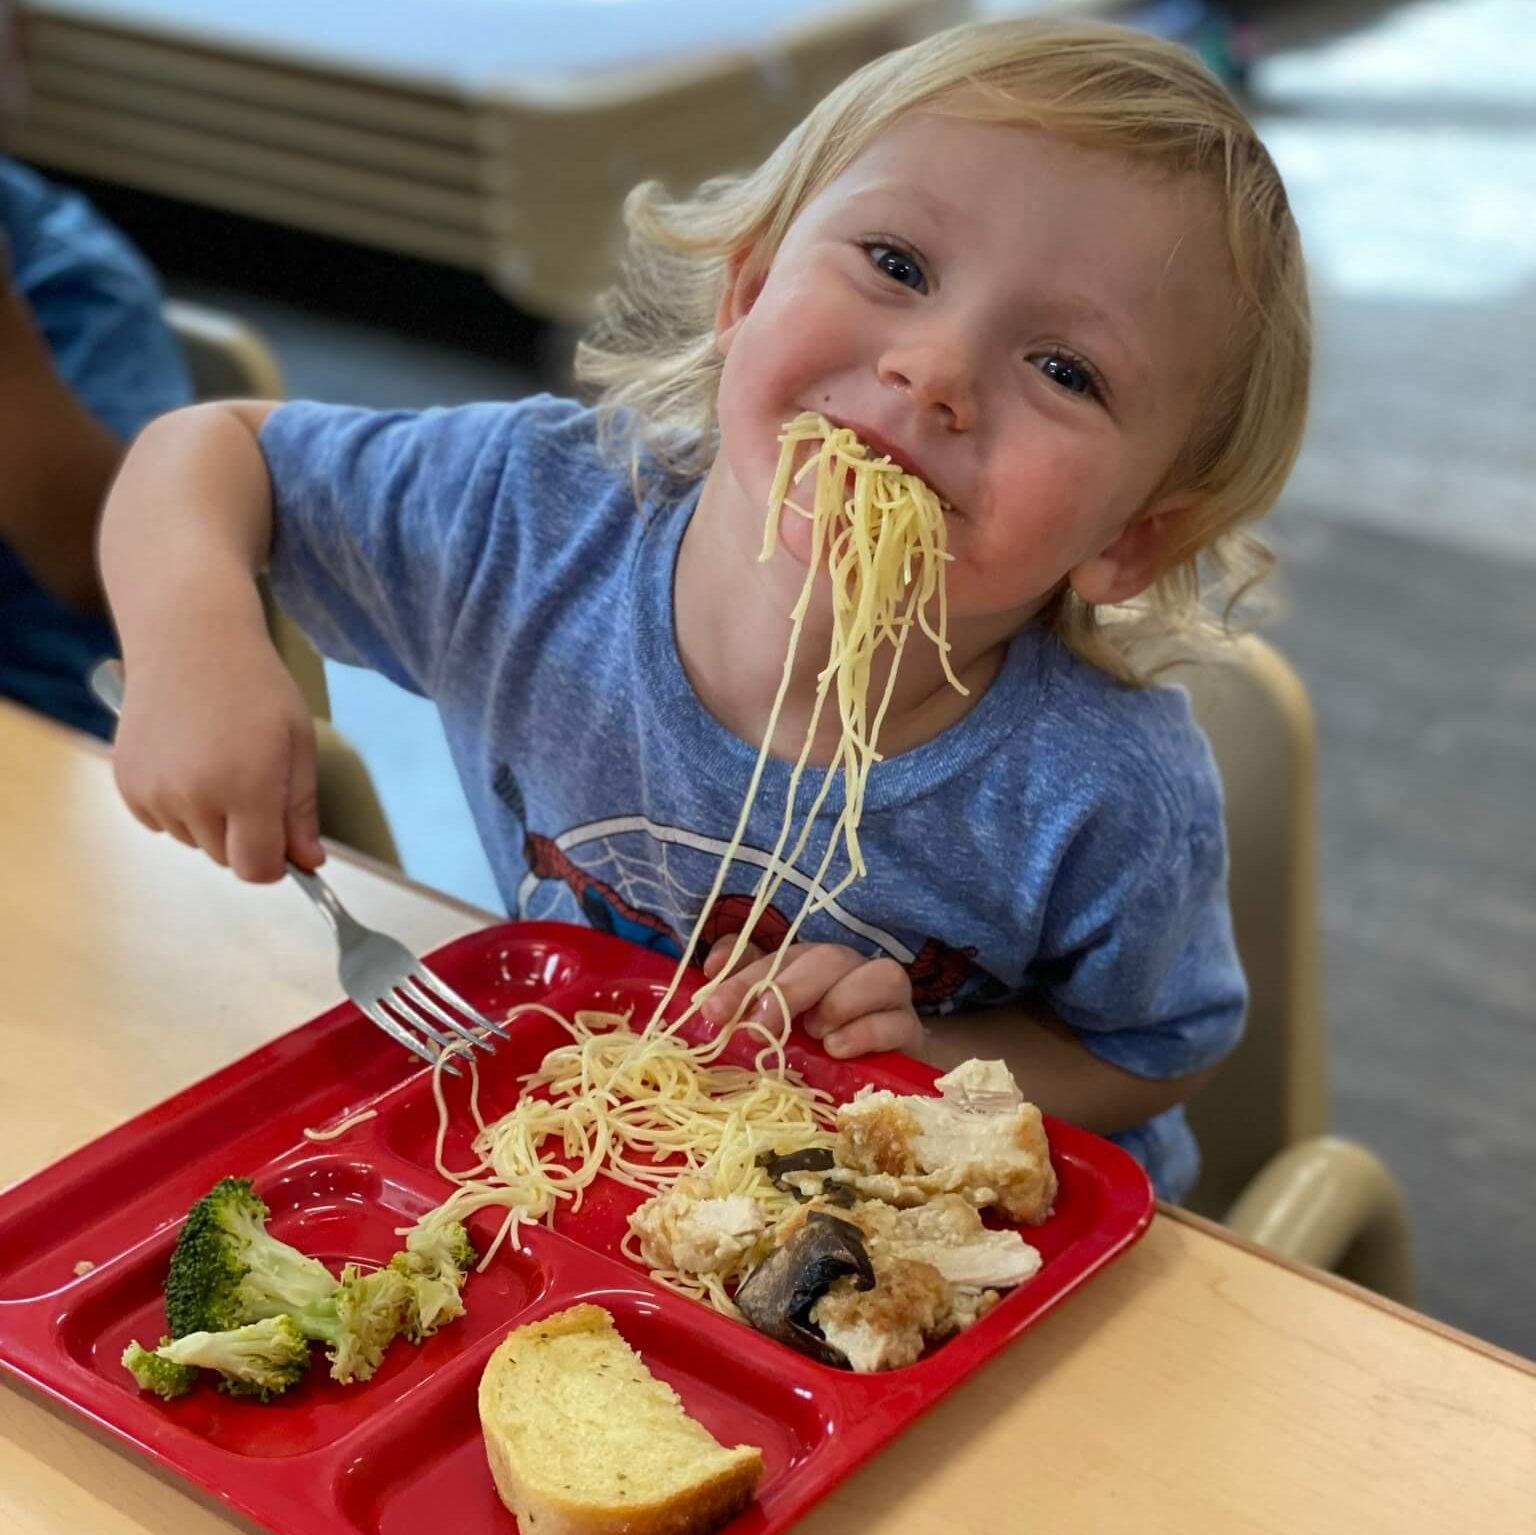 child eating with spaghetti hanging out of his mouth